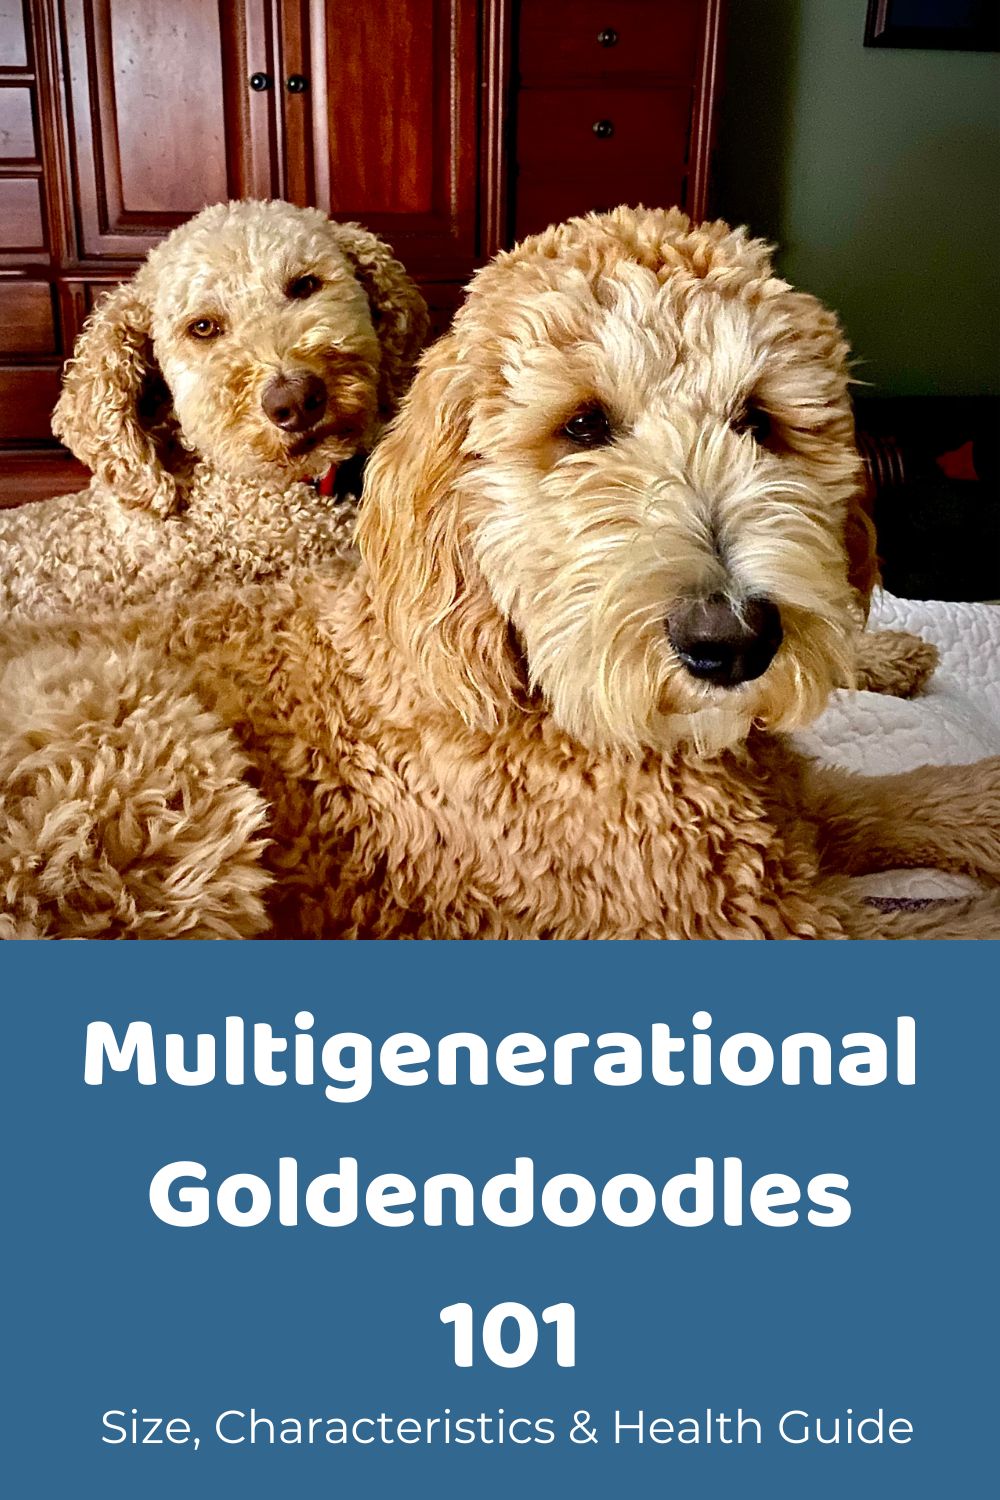 Goldendoodle (Groodle): Dog Breed Characteristics & Care